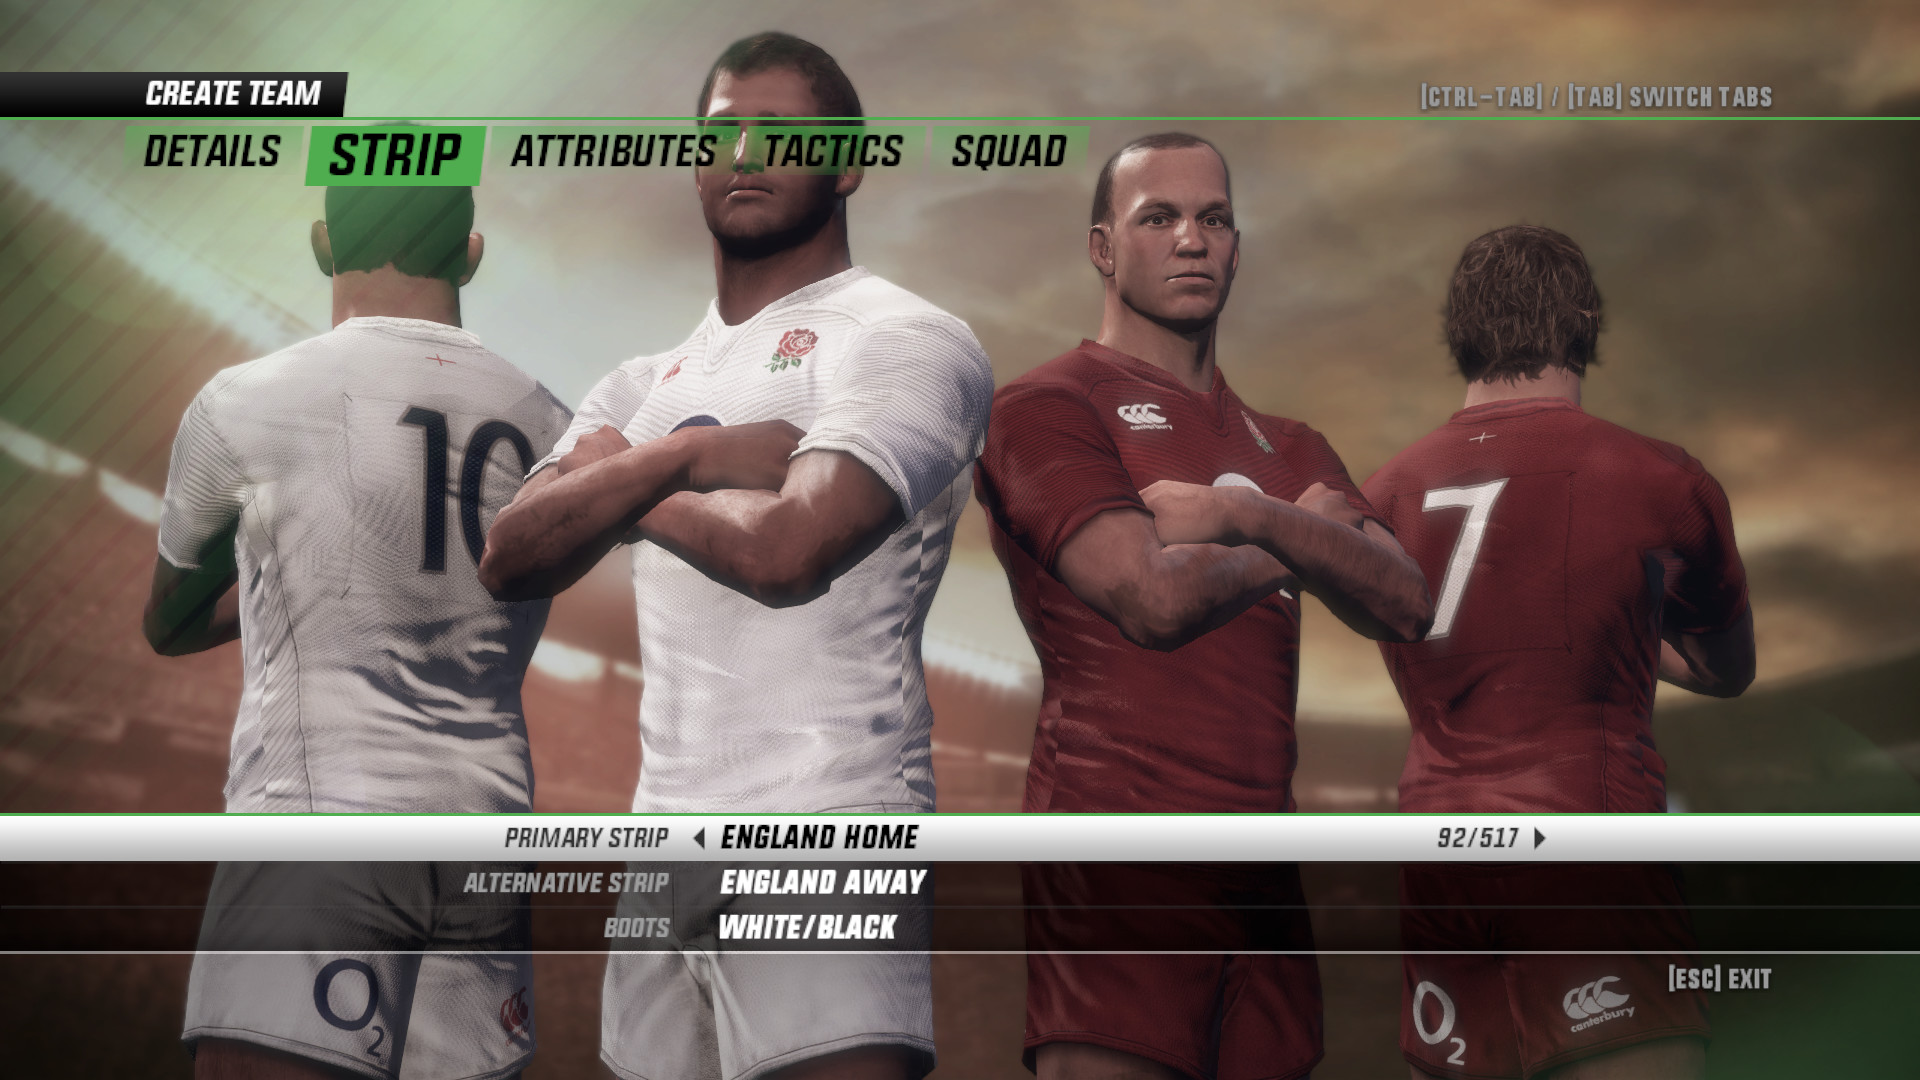 can you use nvidia with rugby challenge 3